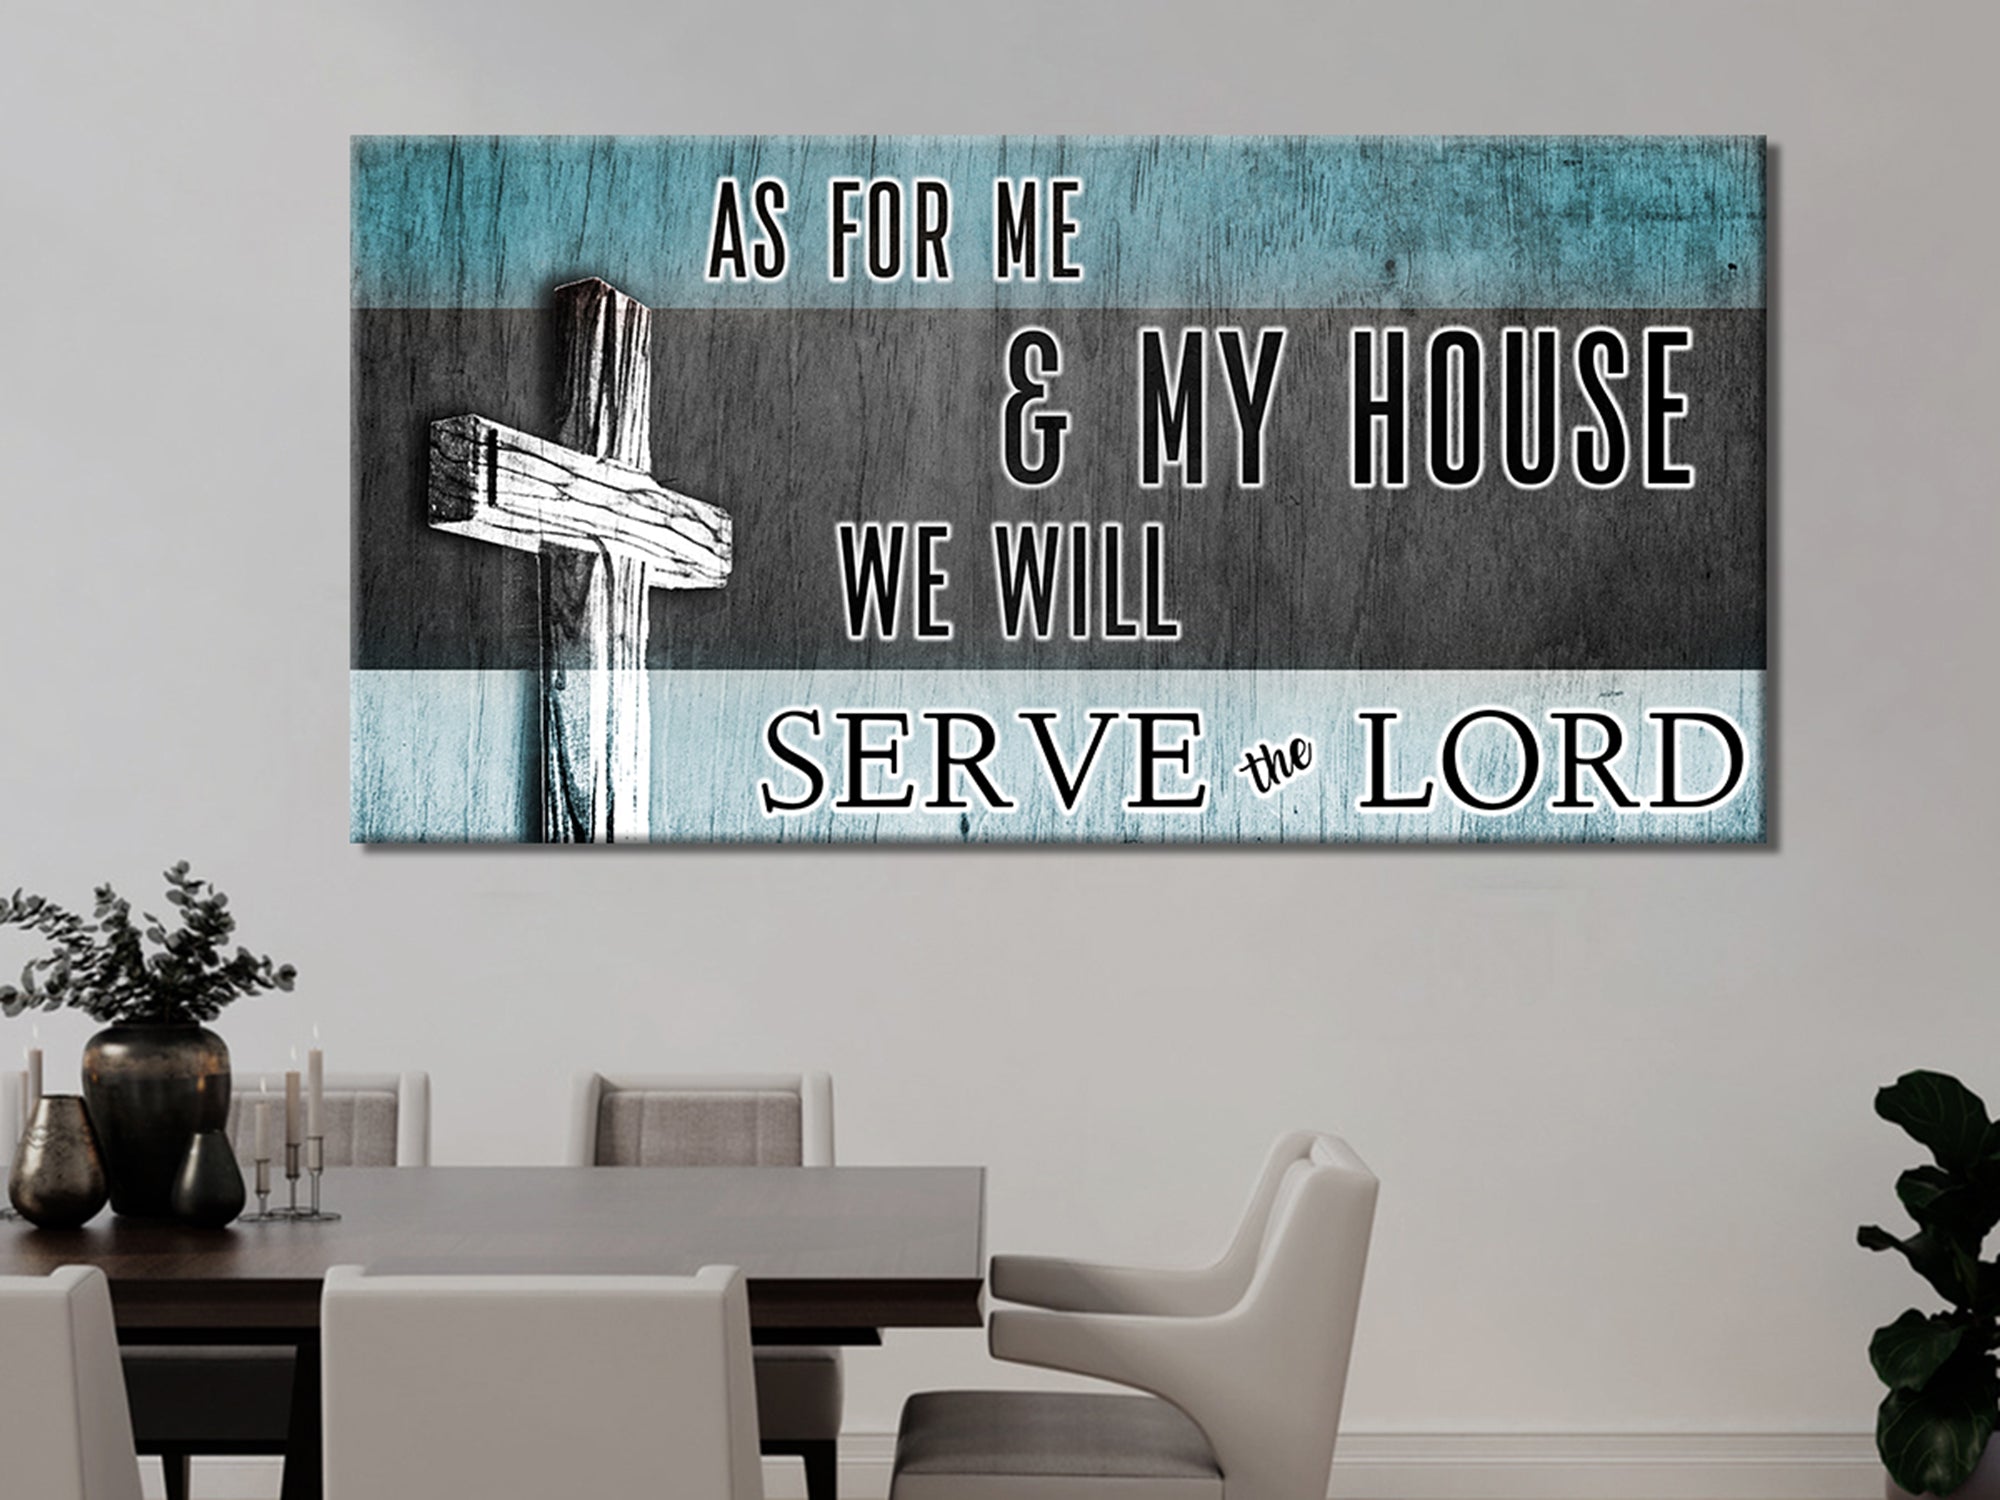 WE WILL SERVE THE LORD - Living Room - Christian Canvas Wall Art